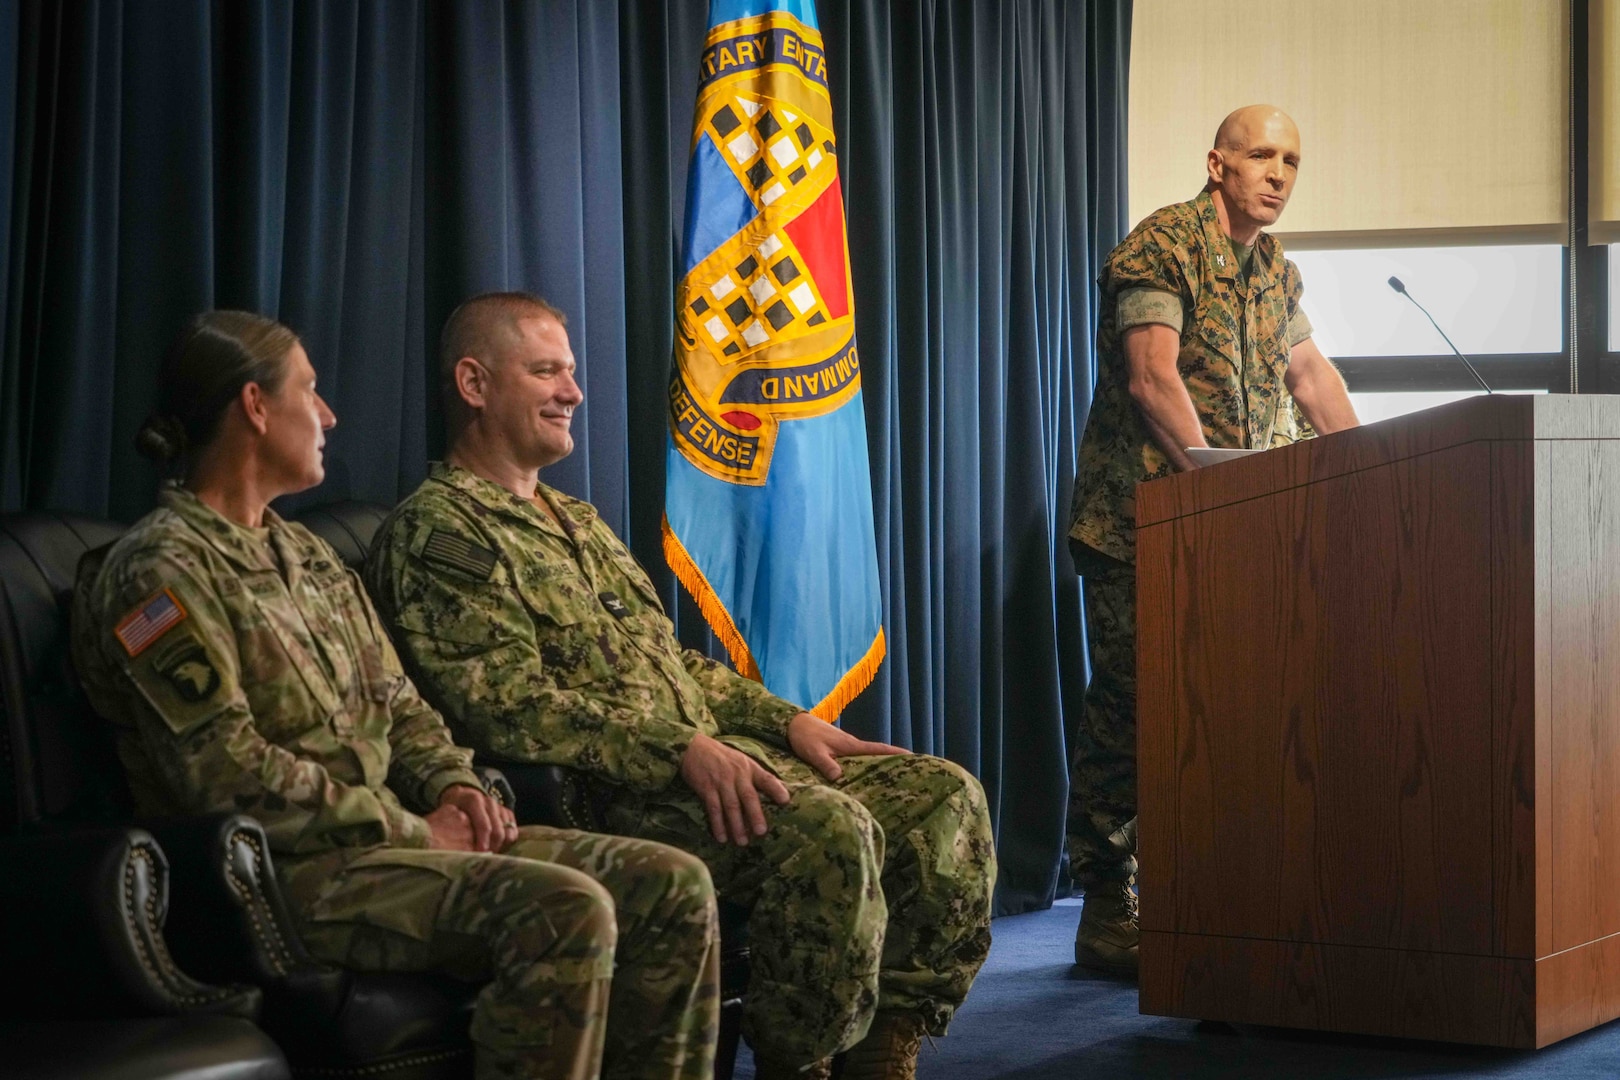 Marine Corps Col. Jesse Sjoberg, outgoing Western Sector commander, gives remarks during a change of command ceremony June 28.